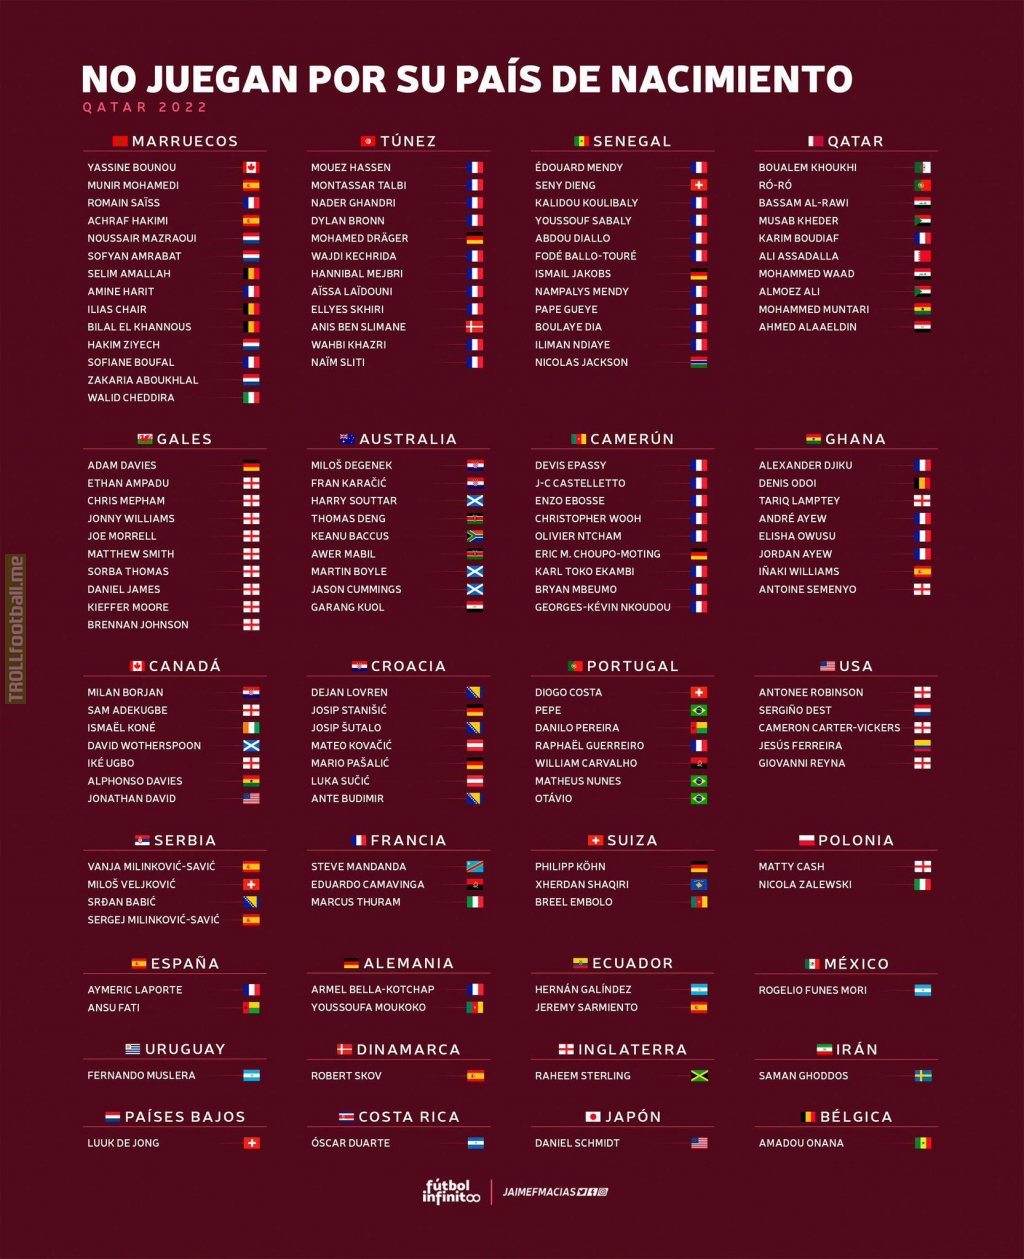 137 players who will not represent their country of birth at the World Cup